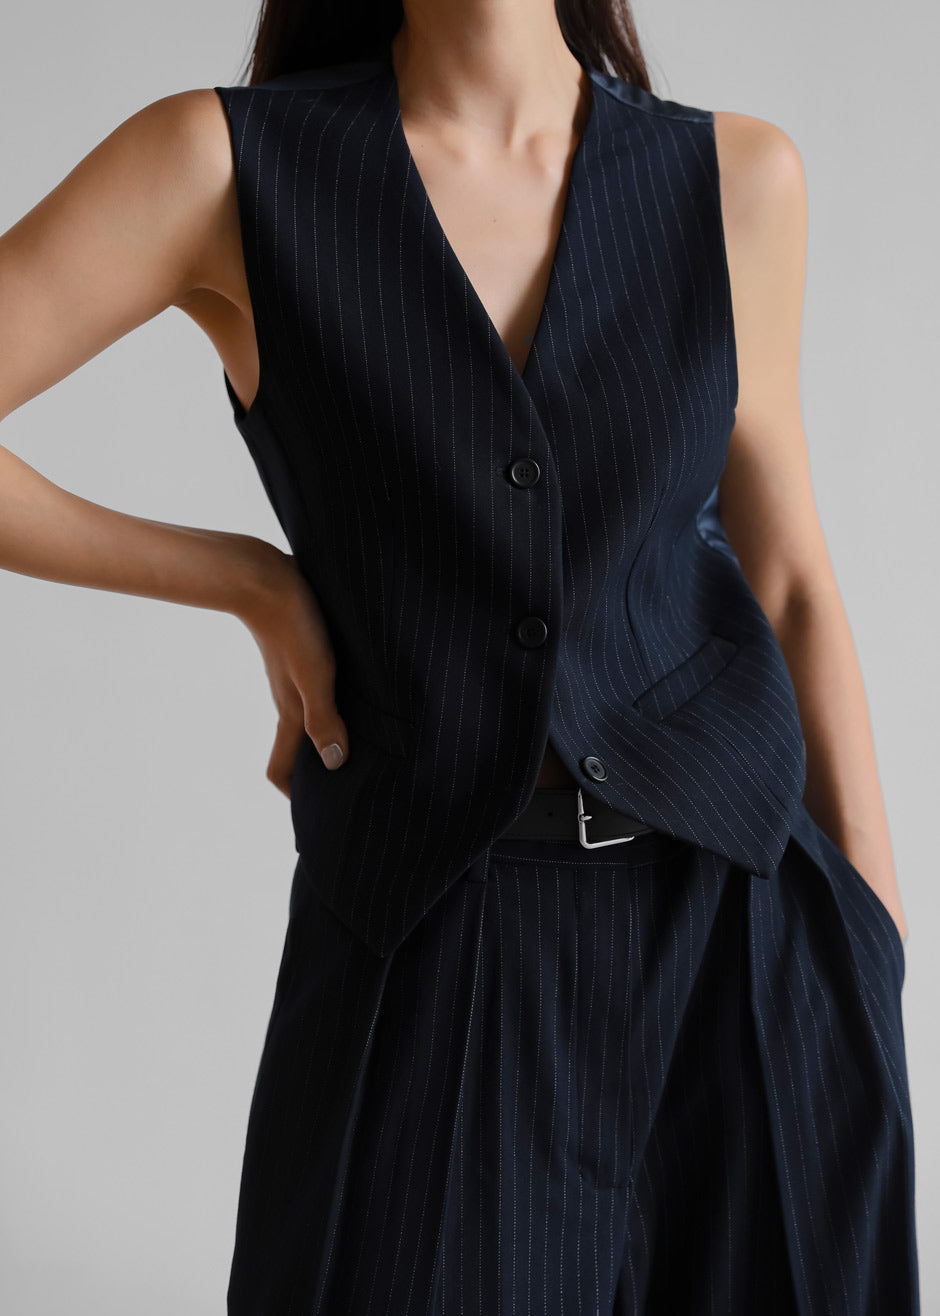 Tansy Tailored Vest - Navy Pinstripe - 1